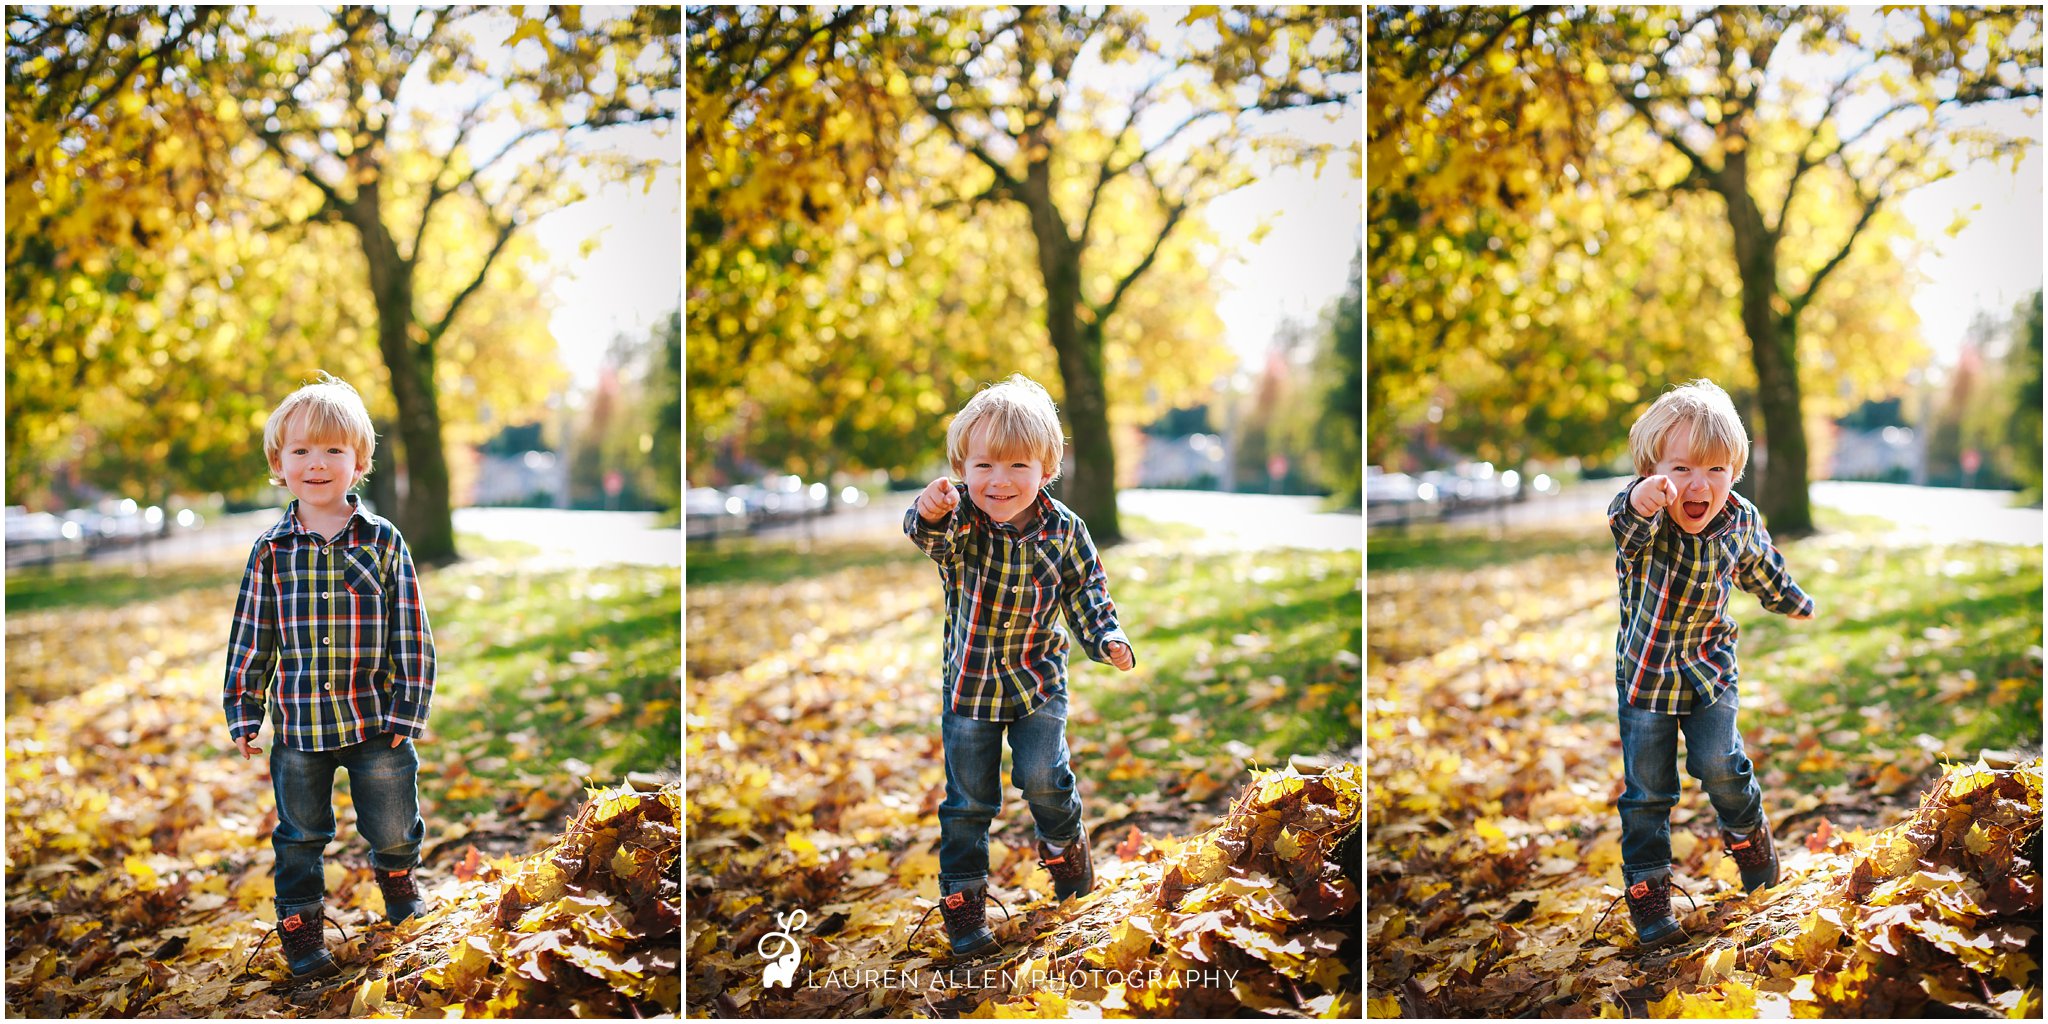 2016,3 year old,Boy,Brady,Fall,Family,Lauren Allen Photography,Mom,Oregon,Portland,Rara,Tree,candid,carefree,child,child photographer,childhood,grandma,kid,laugh,leaves,me,natural light,october,outdoors,outside,plaid,playing,preschooler,yellow,